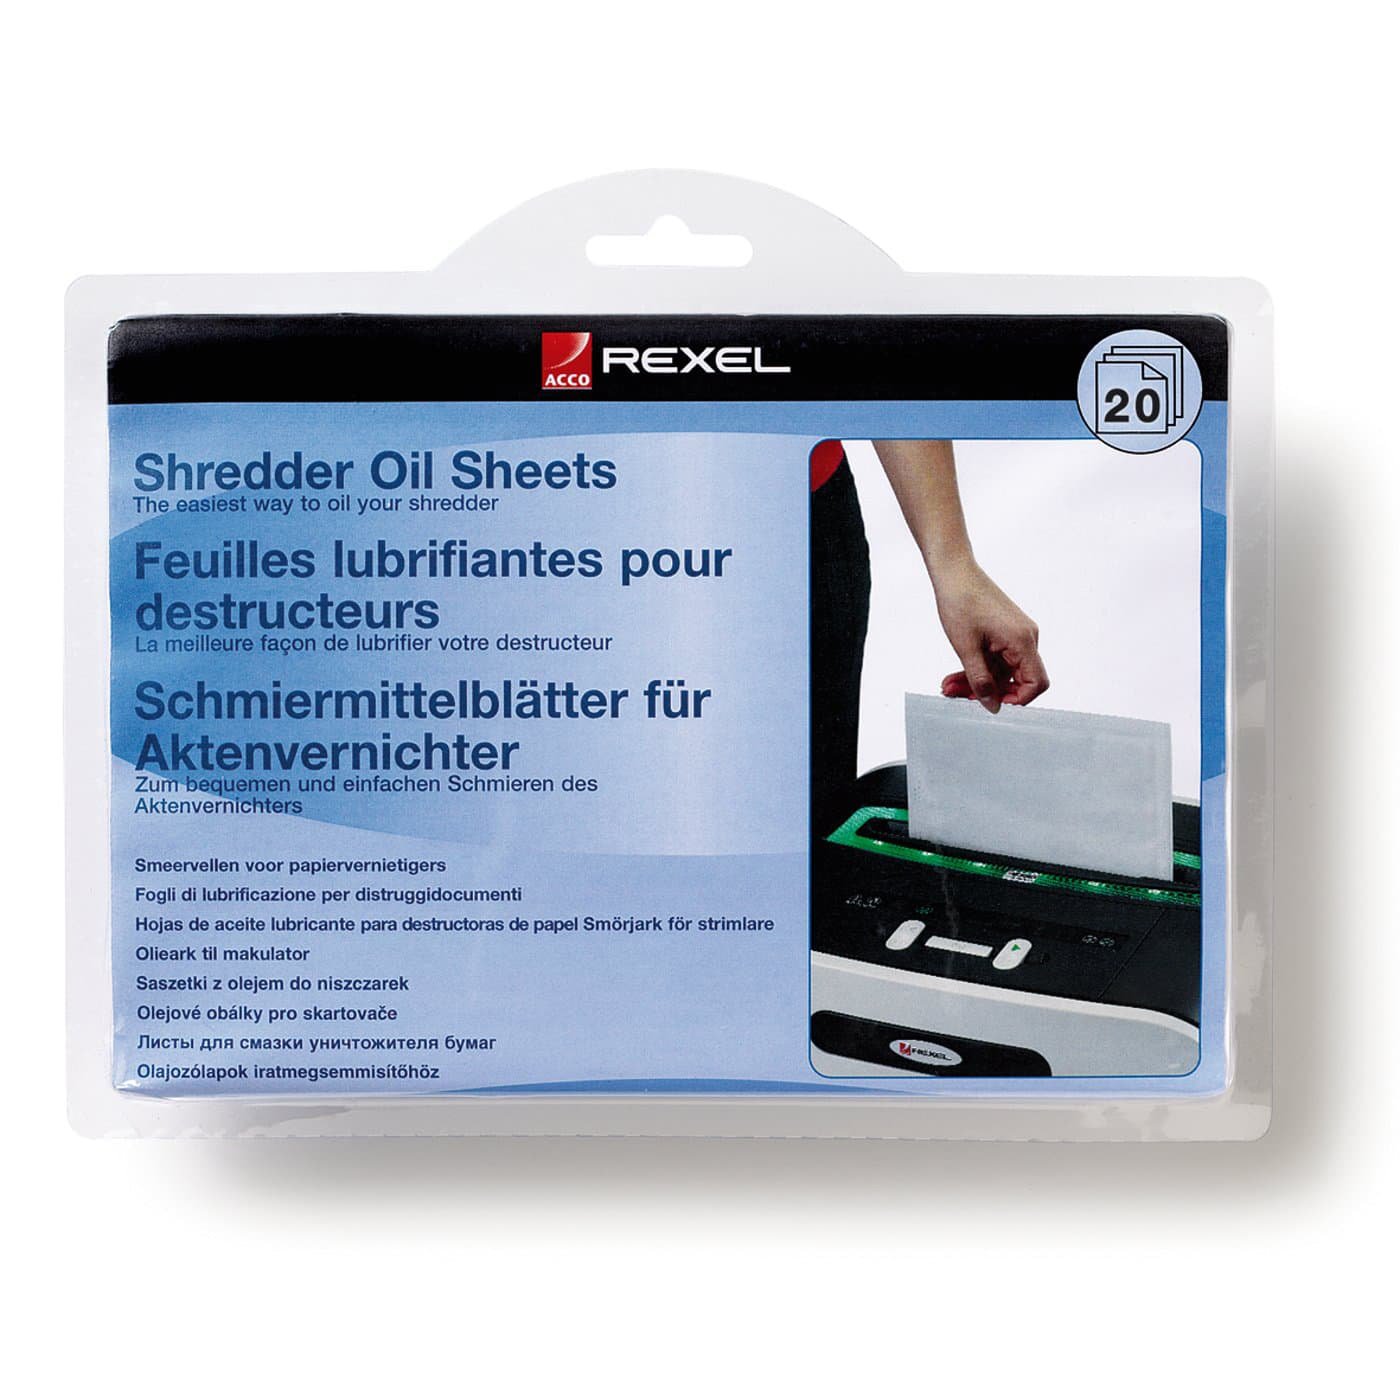 Rexel Shredder Oil Sheets (Pkt of 20) - Click Image to Close